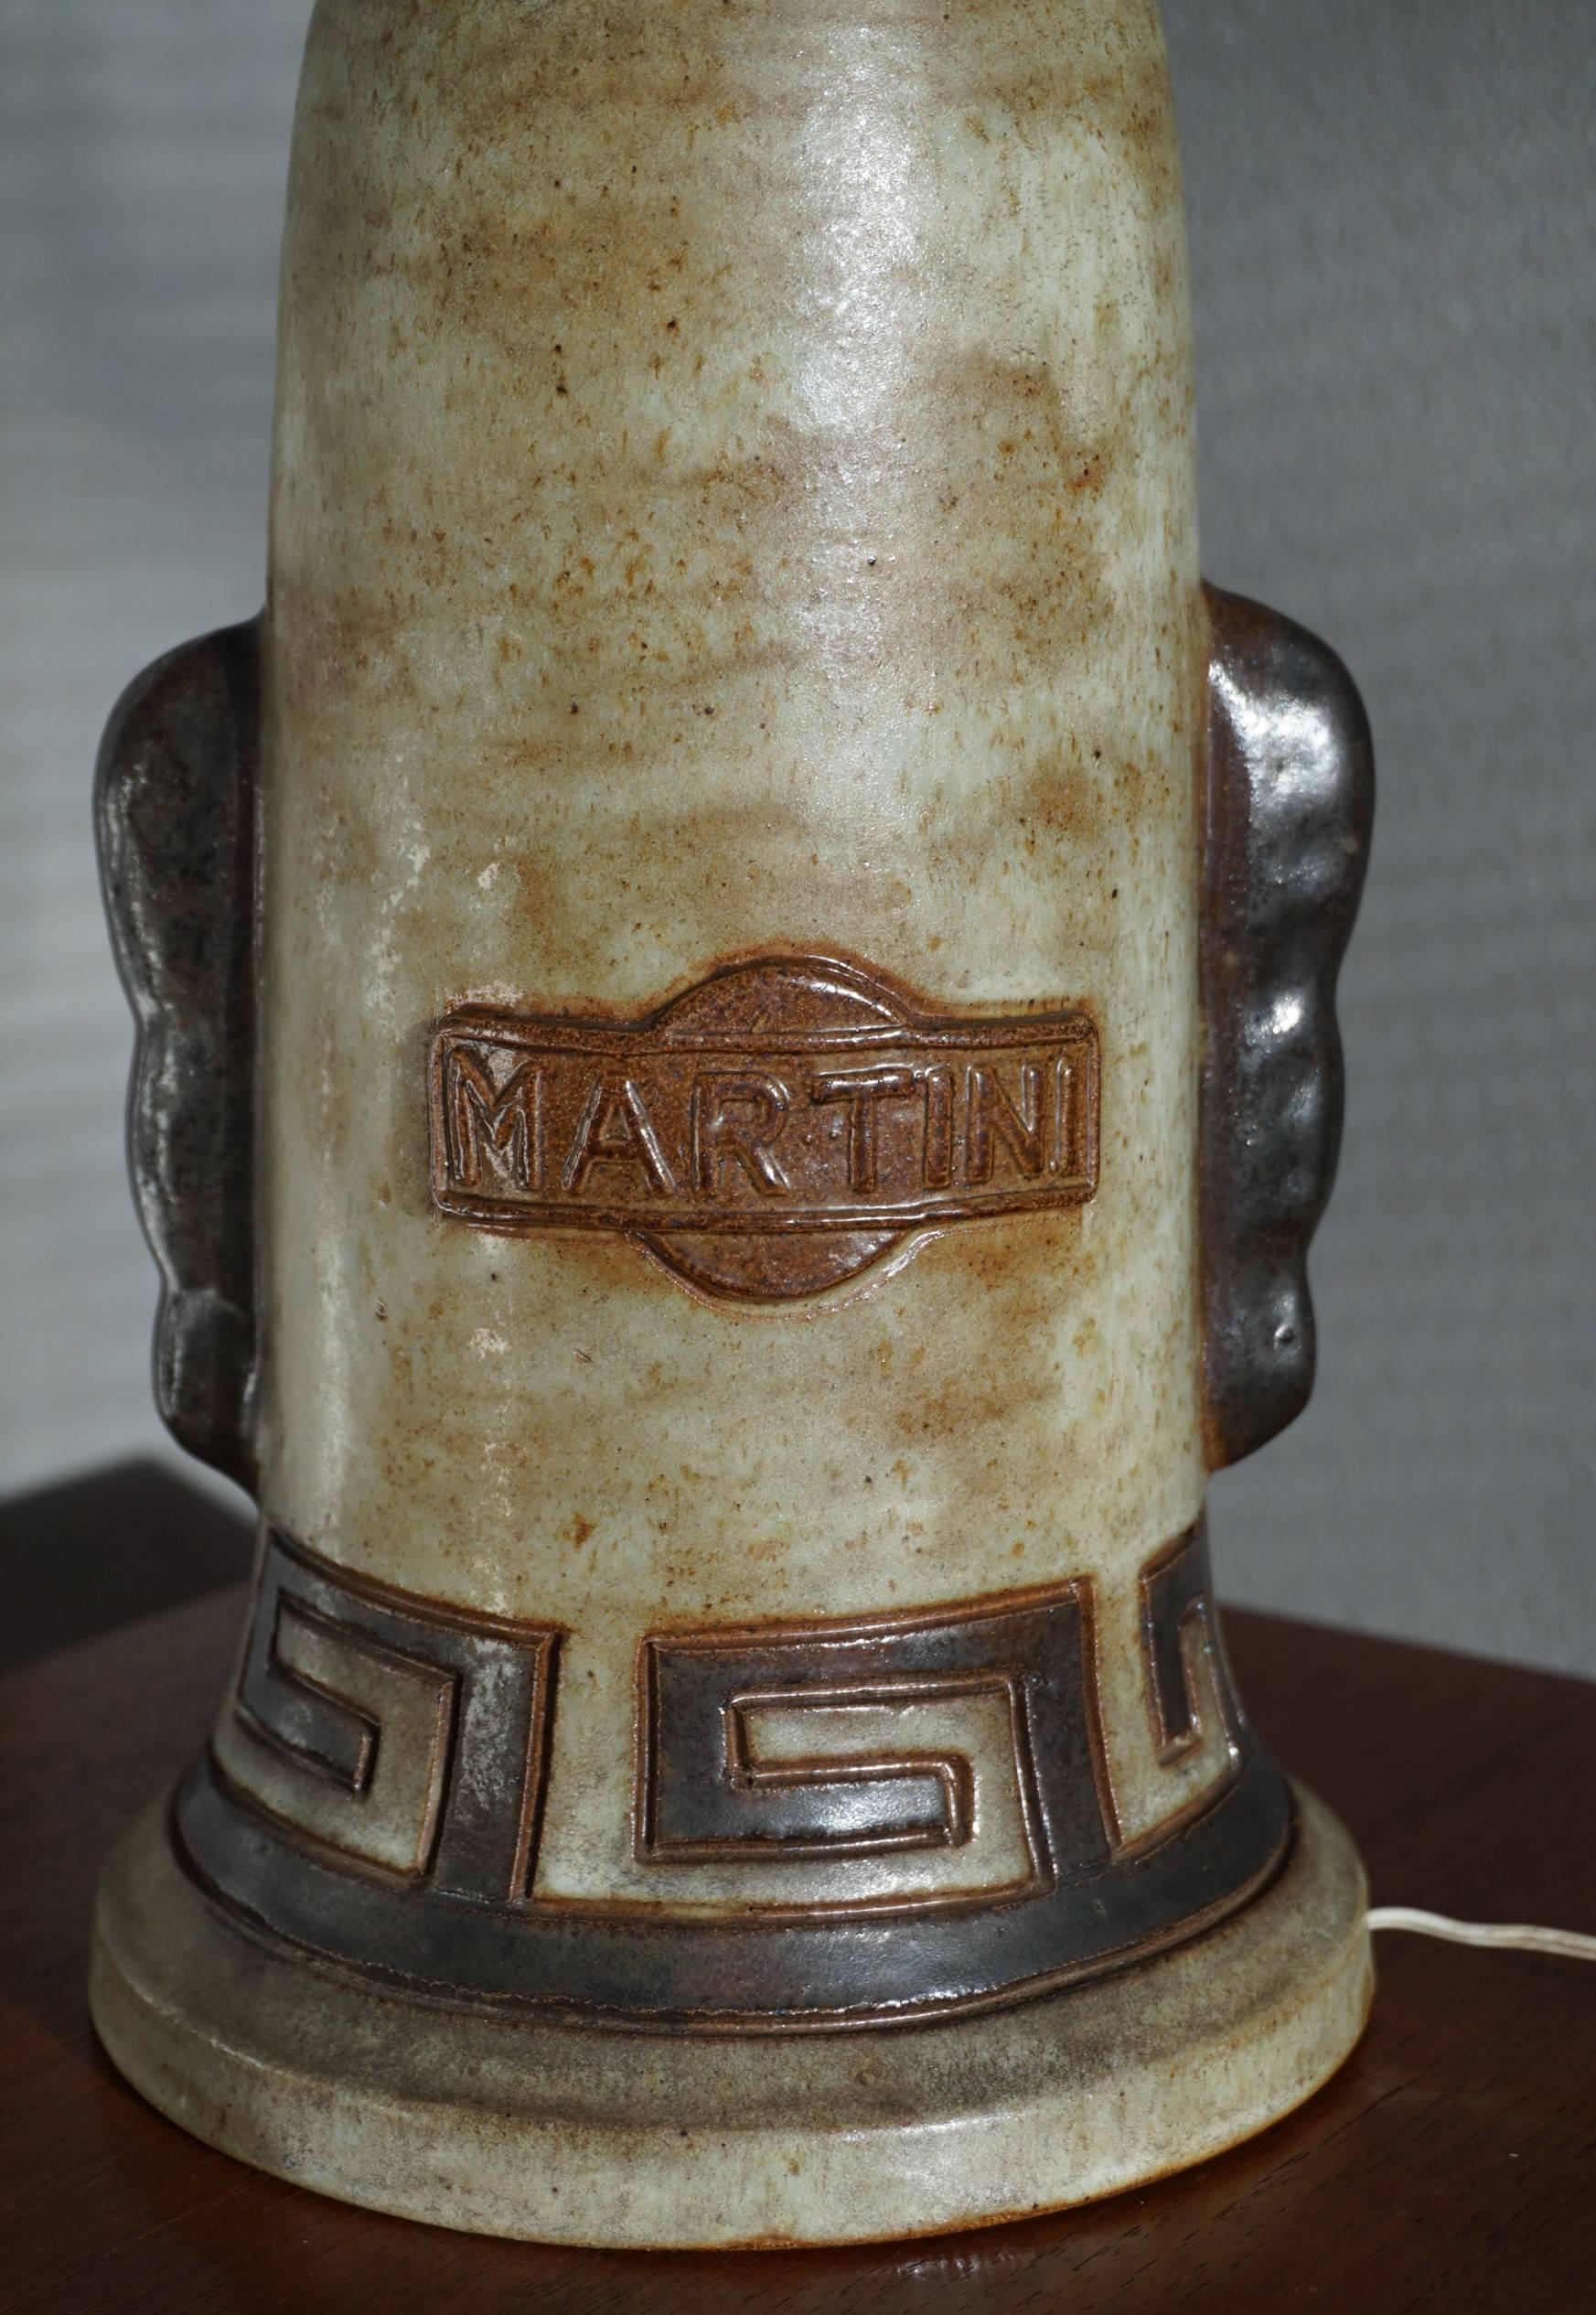 Museum quality and condition, vintage Martini table lamp.

When we first laid eyes on this Italian and all handcrafted table lamp we immediately felt it was very special. After doing a little research we found that this vintage Martini table lamp is